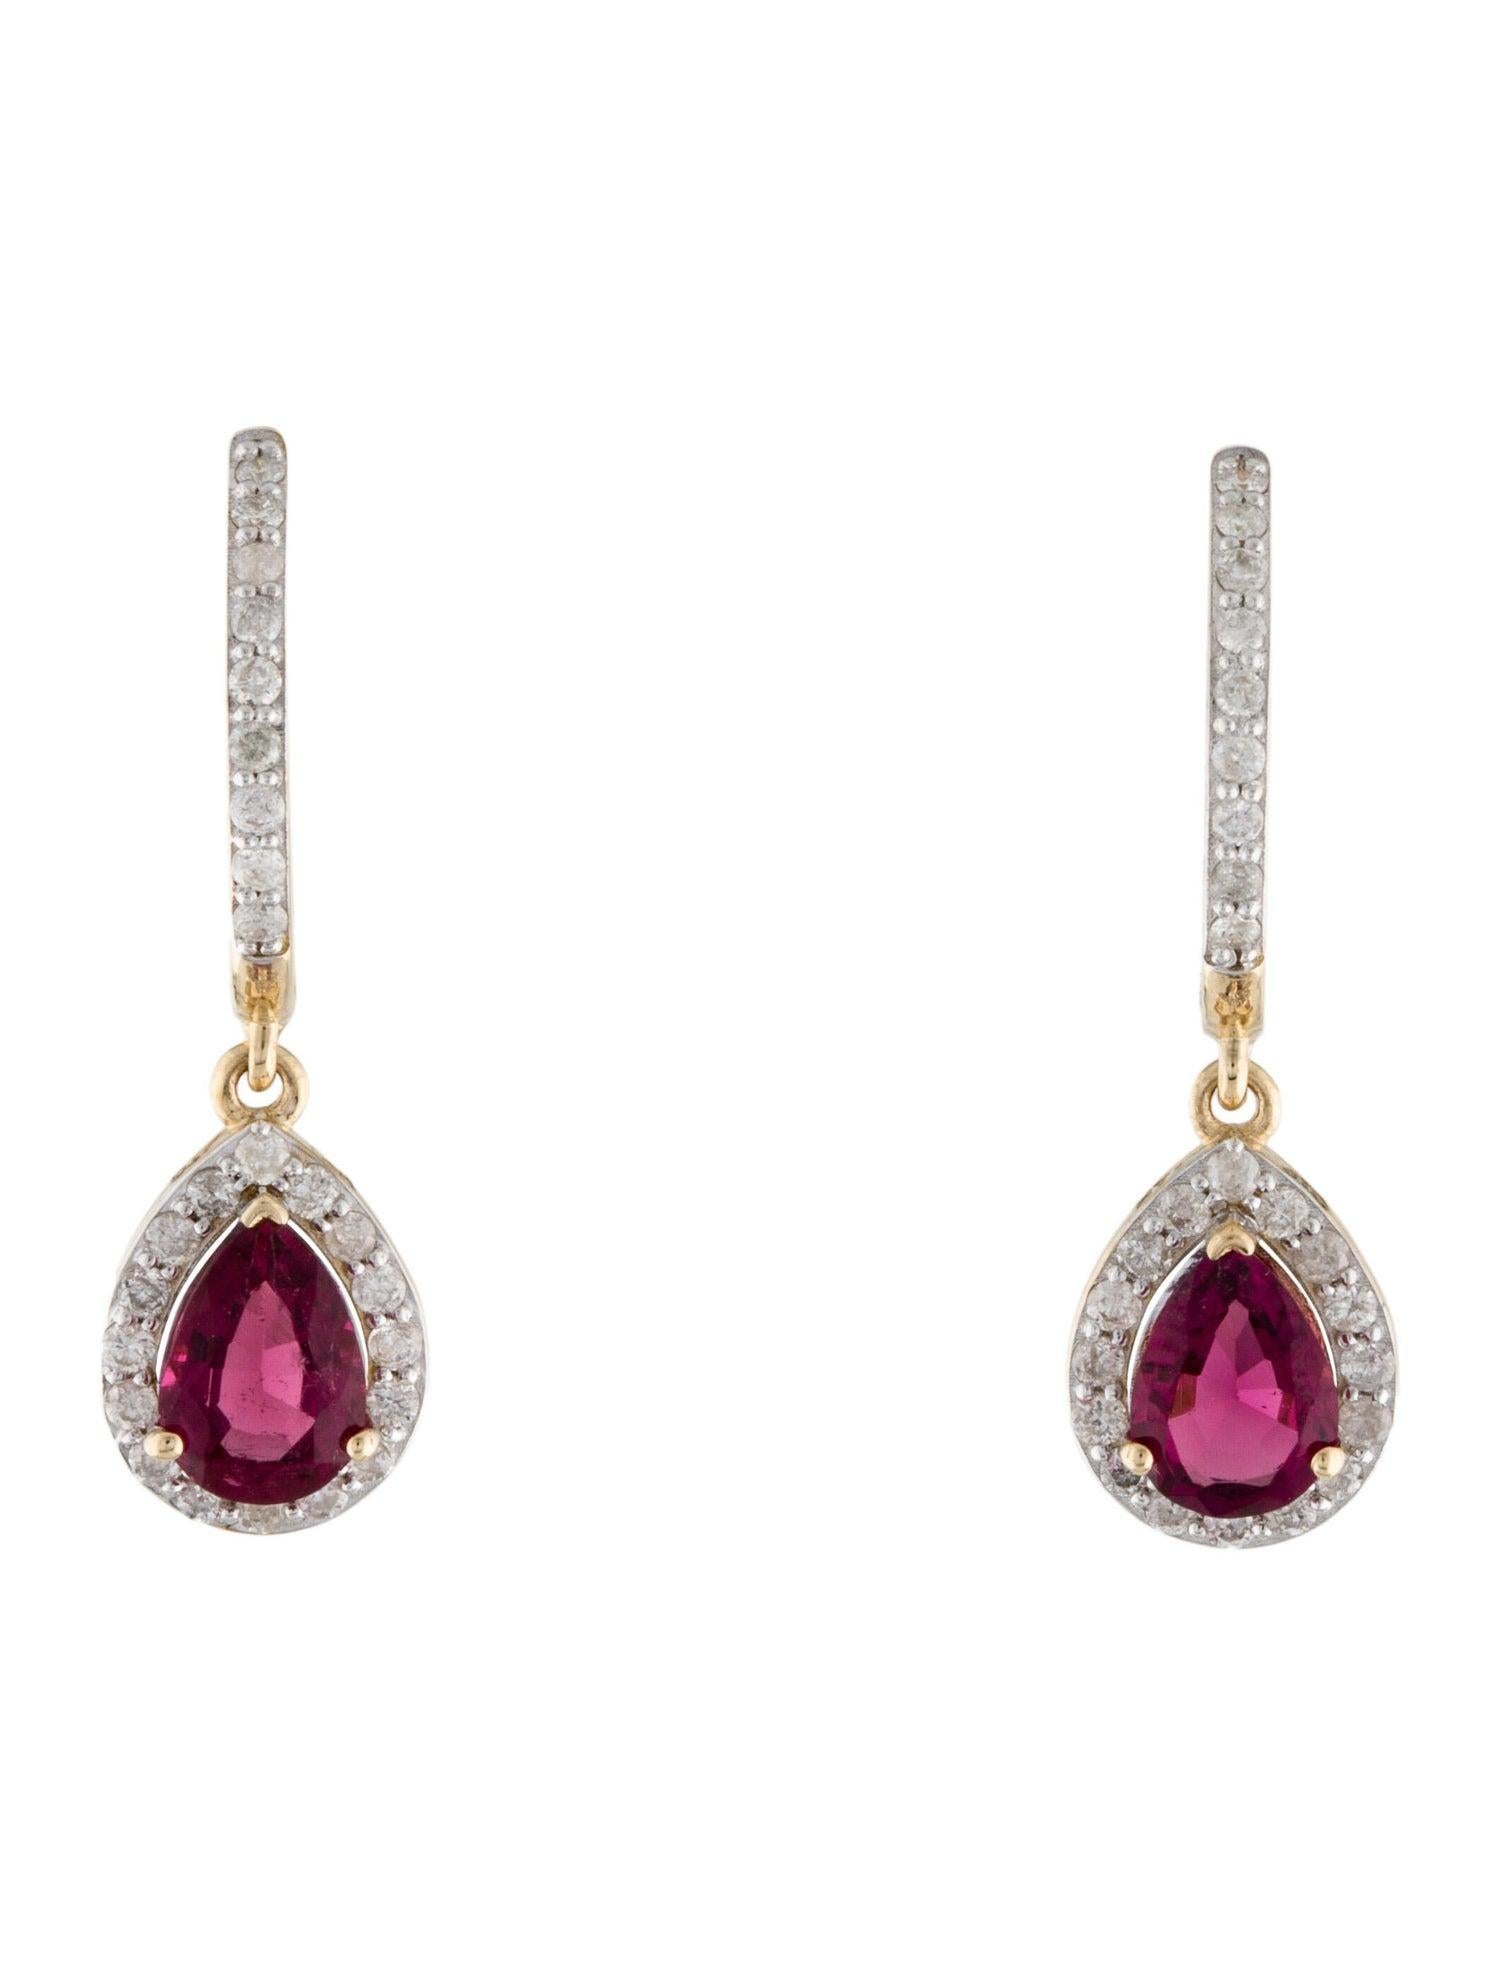 Brilliant Cut 14K Rubellite & Diamond Drop Earrings - Exquisite Elegance, Timeless Glamour For Sale